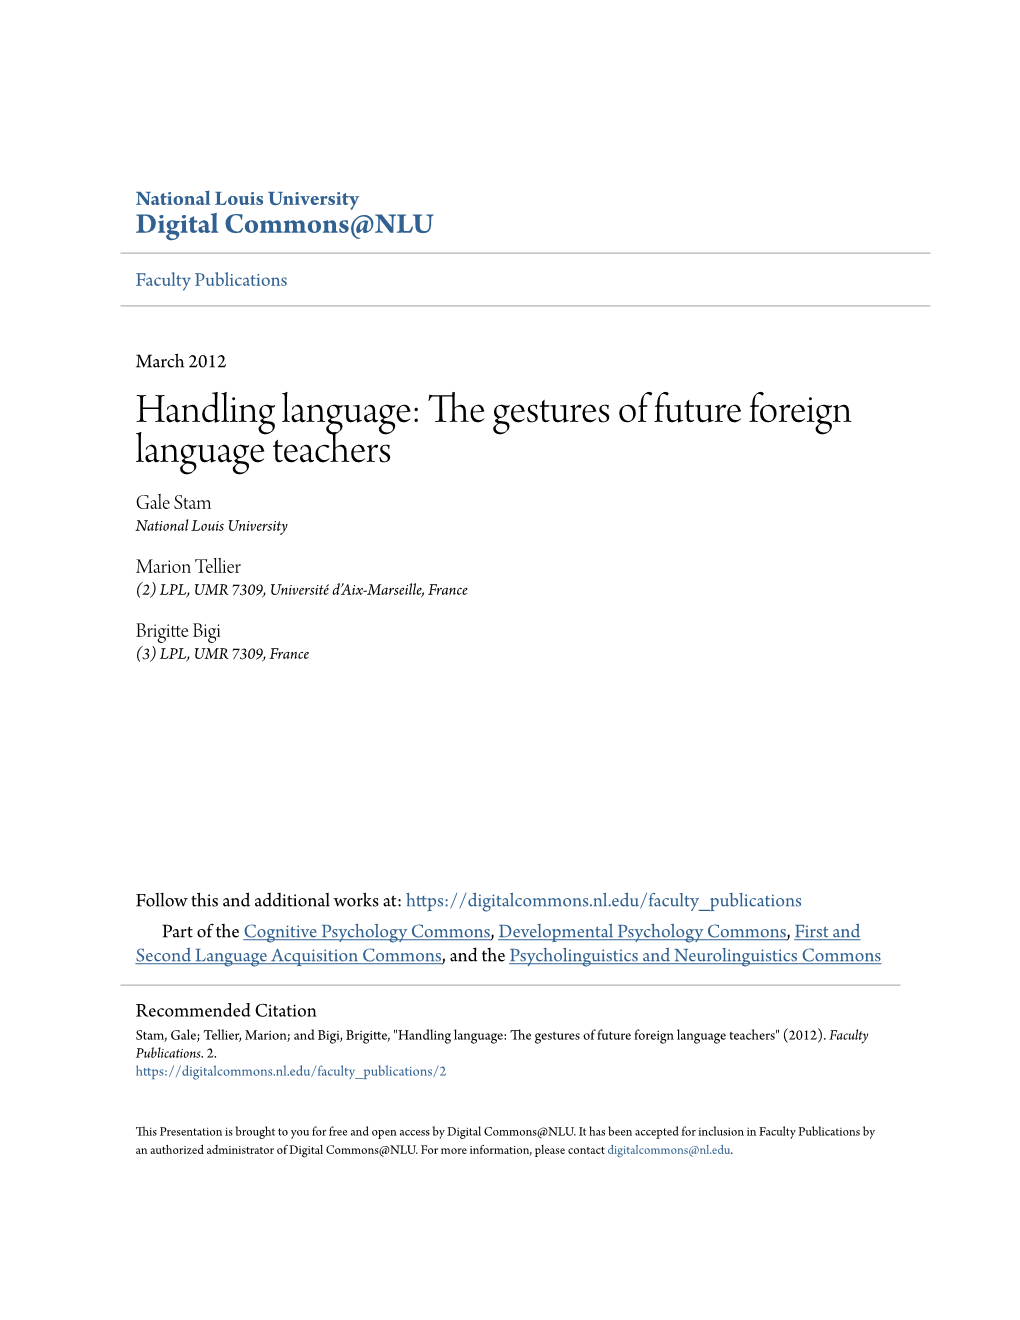 Handling Language: the Gestures of Future Foreign Language Teachers Gale Stam National Louis University